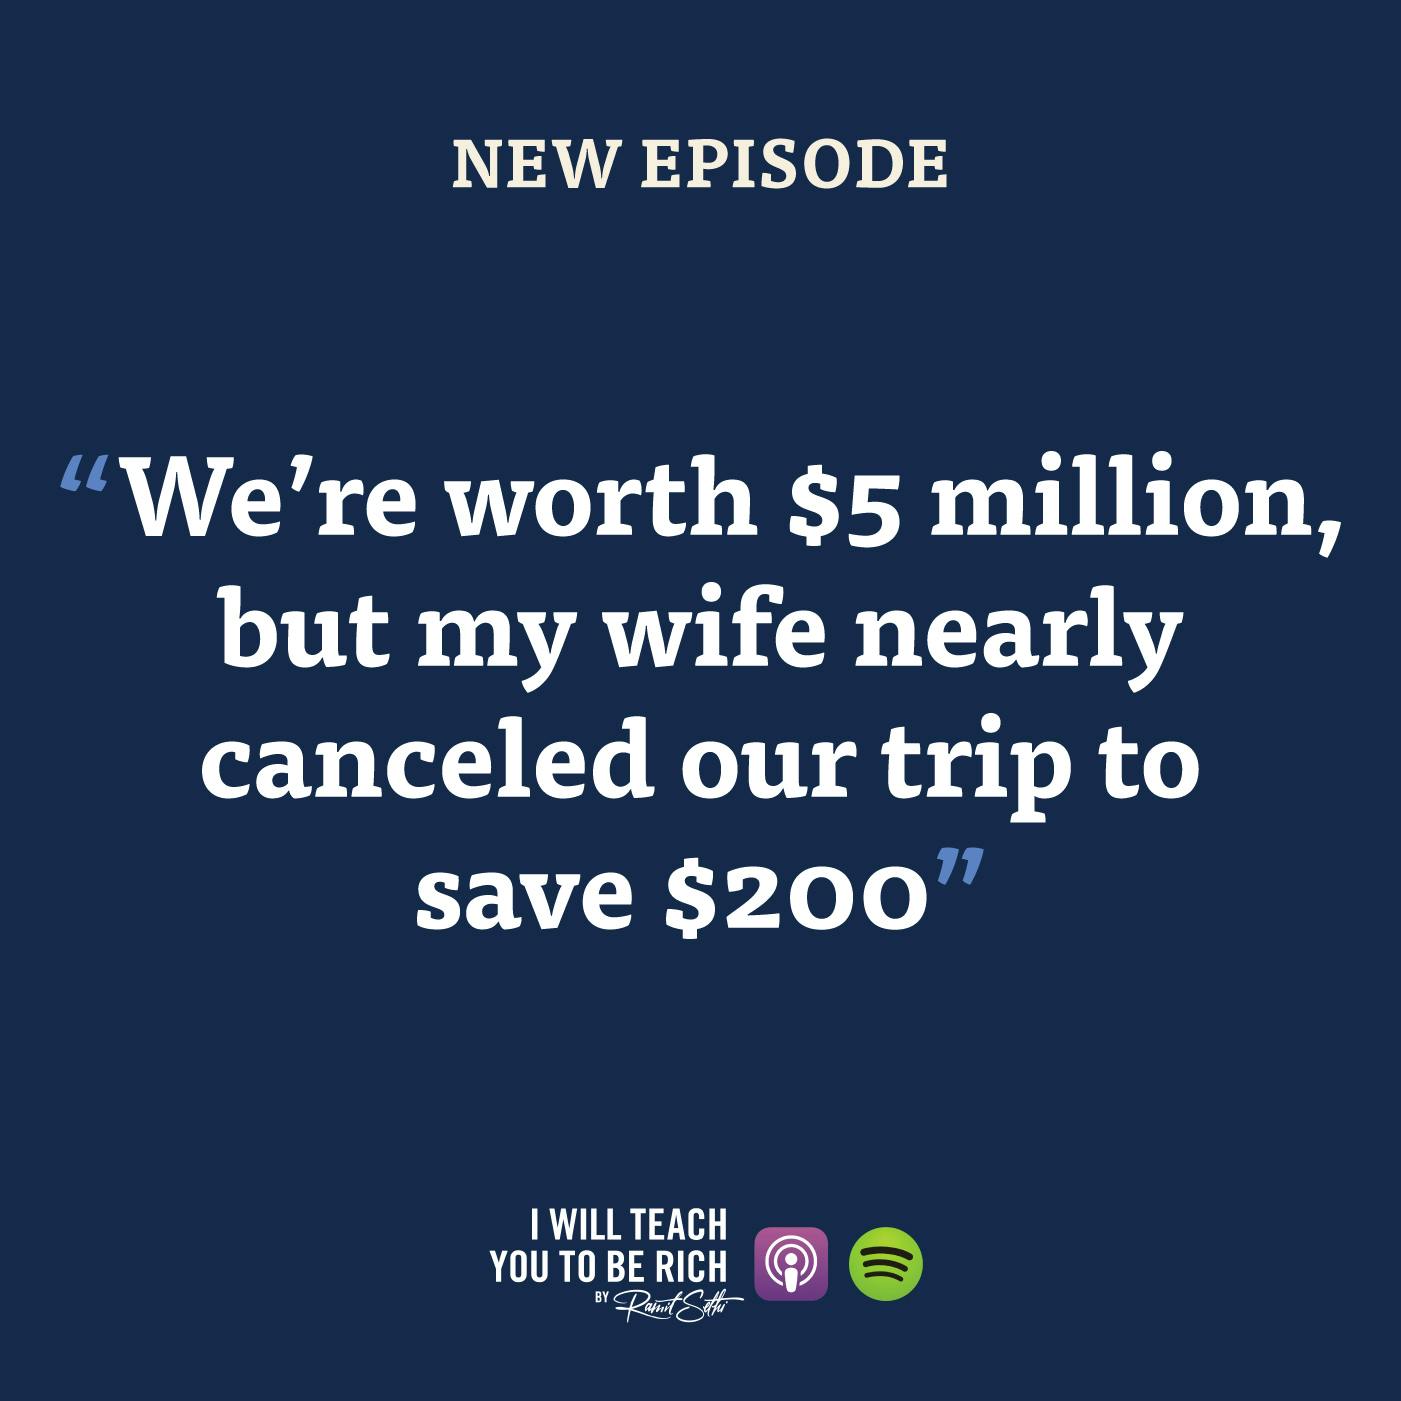 40. “We’re worth $5 million but my wife nearly canceled our trip to save $200”